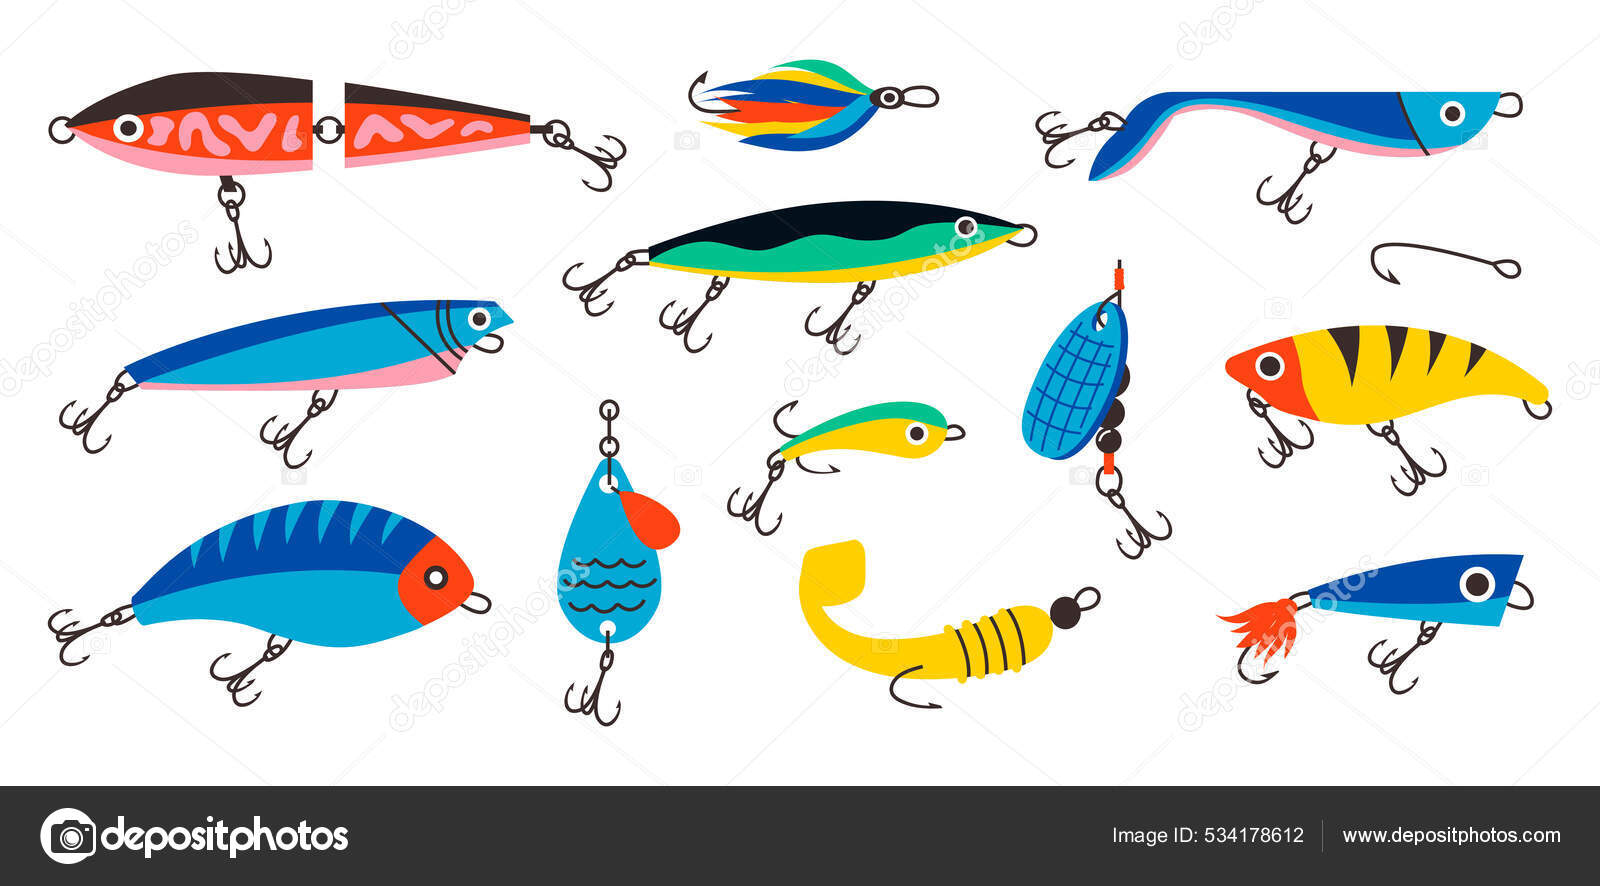 Fishing bait. Abstract contemporary fishery lures and wobblers